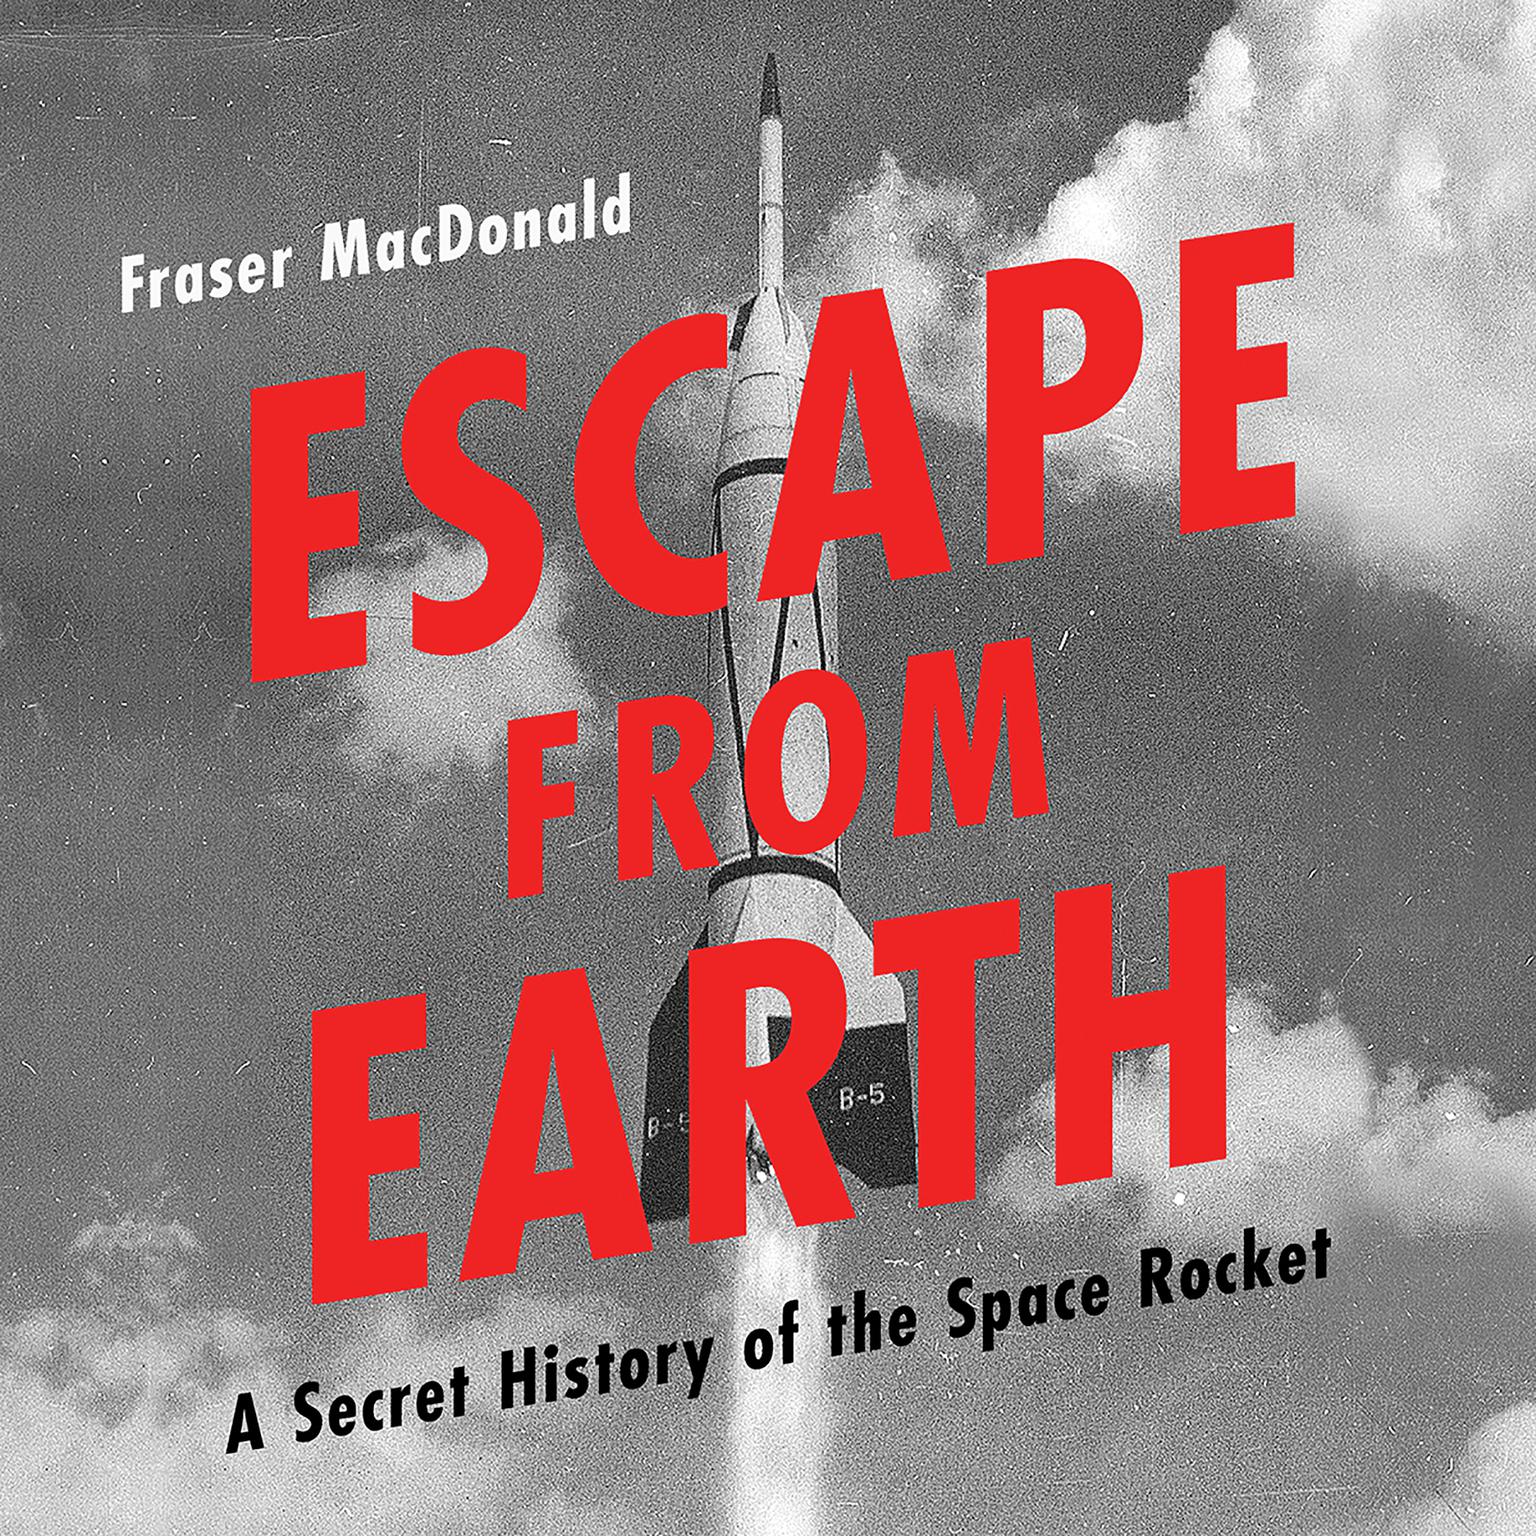 Escape from Earth: A Secret History of the Space Rocket Audiobook, by Fraser MacDonald